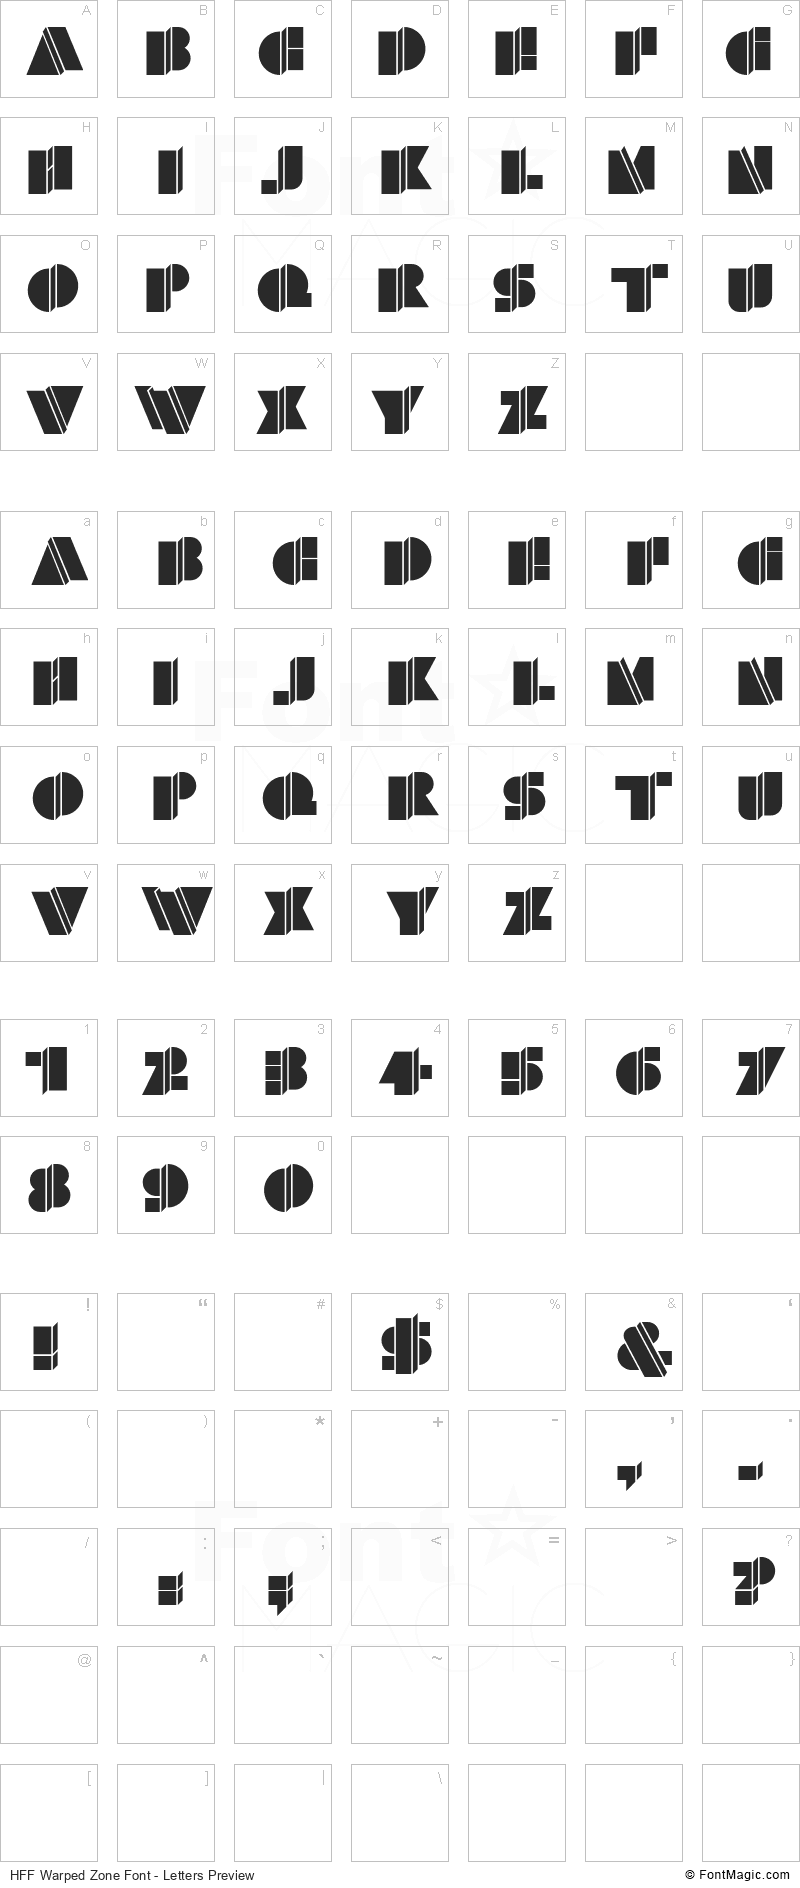 HFF Warped Zone Font - All Latters Preview Chart